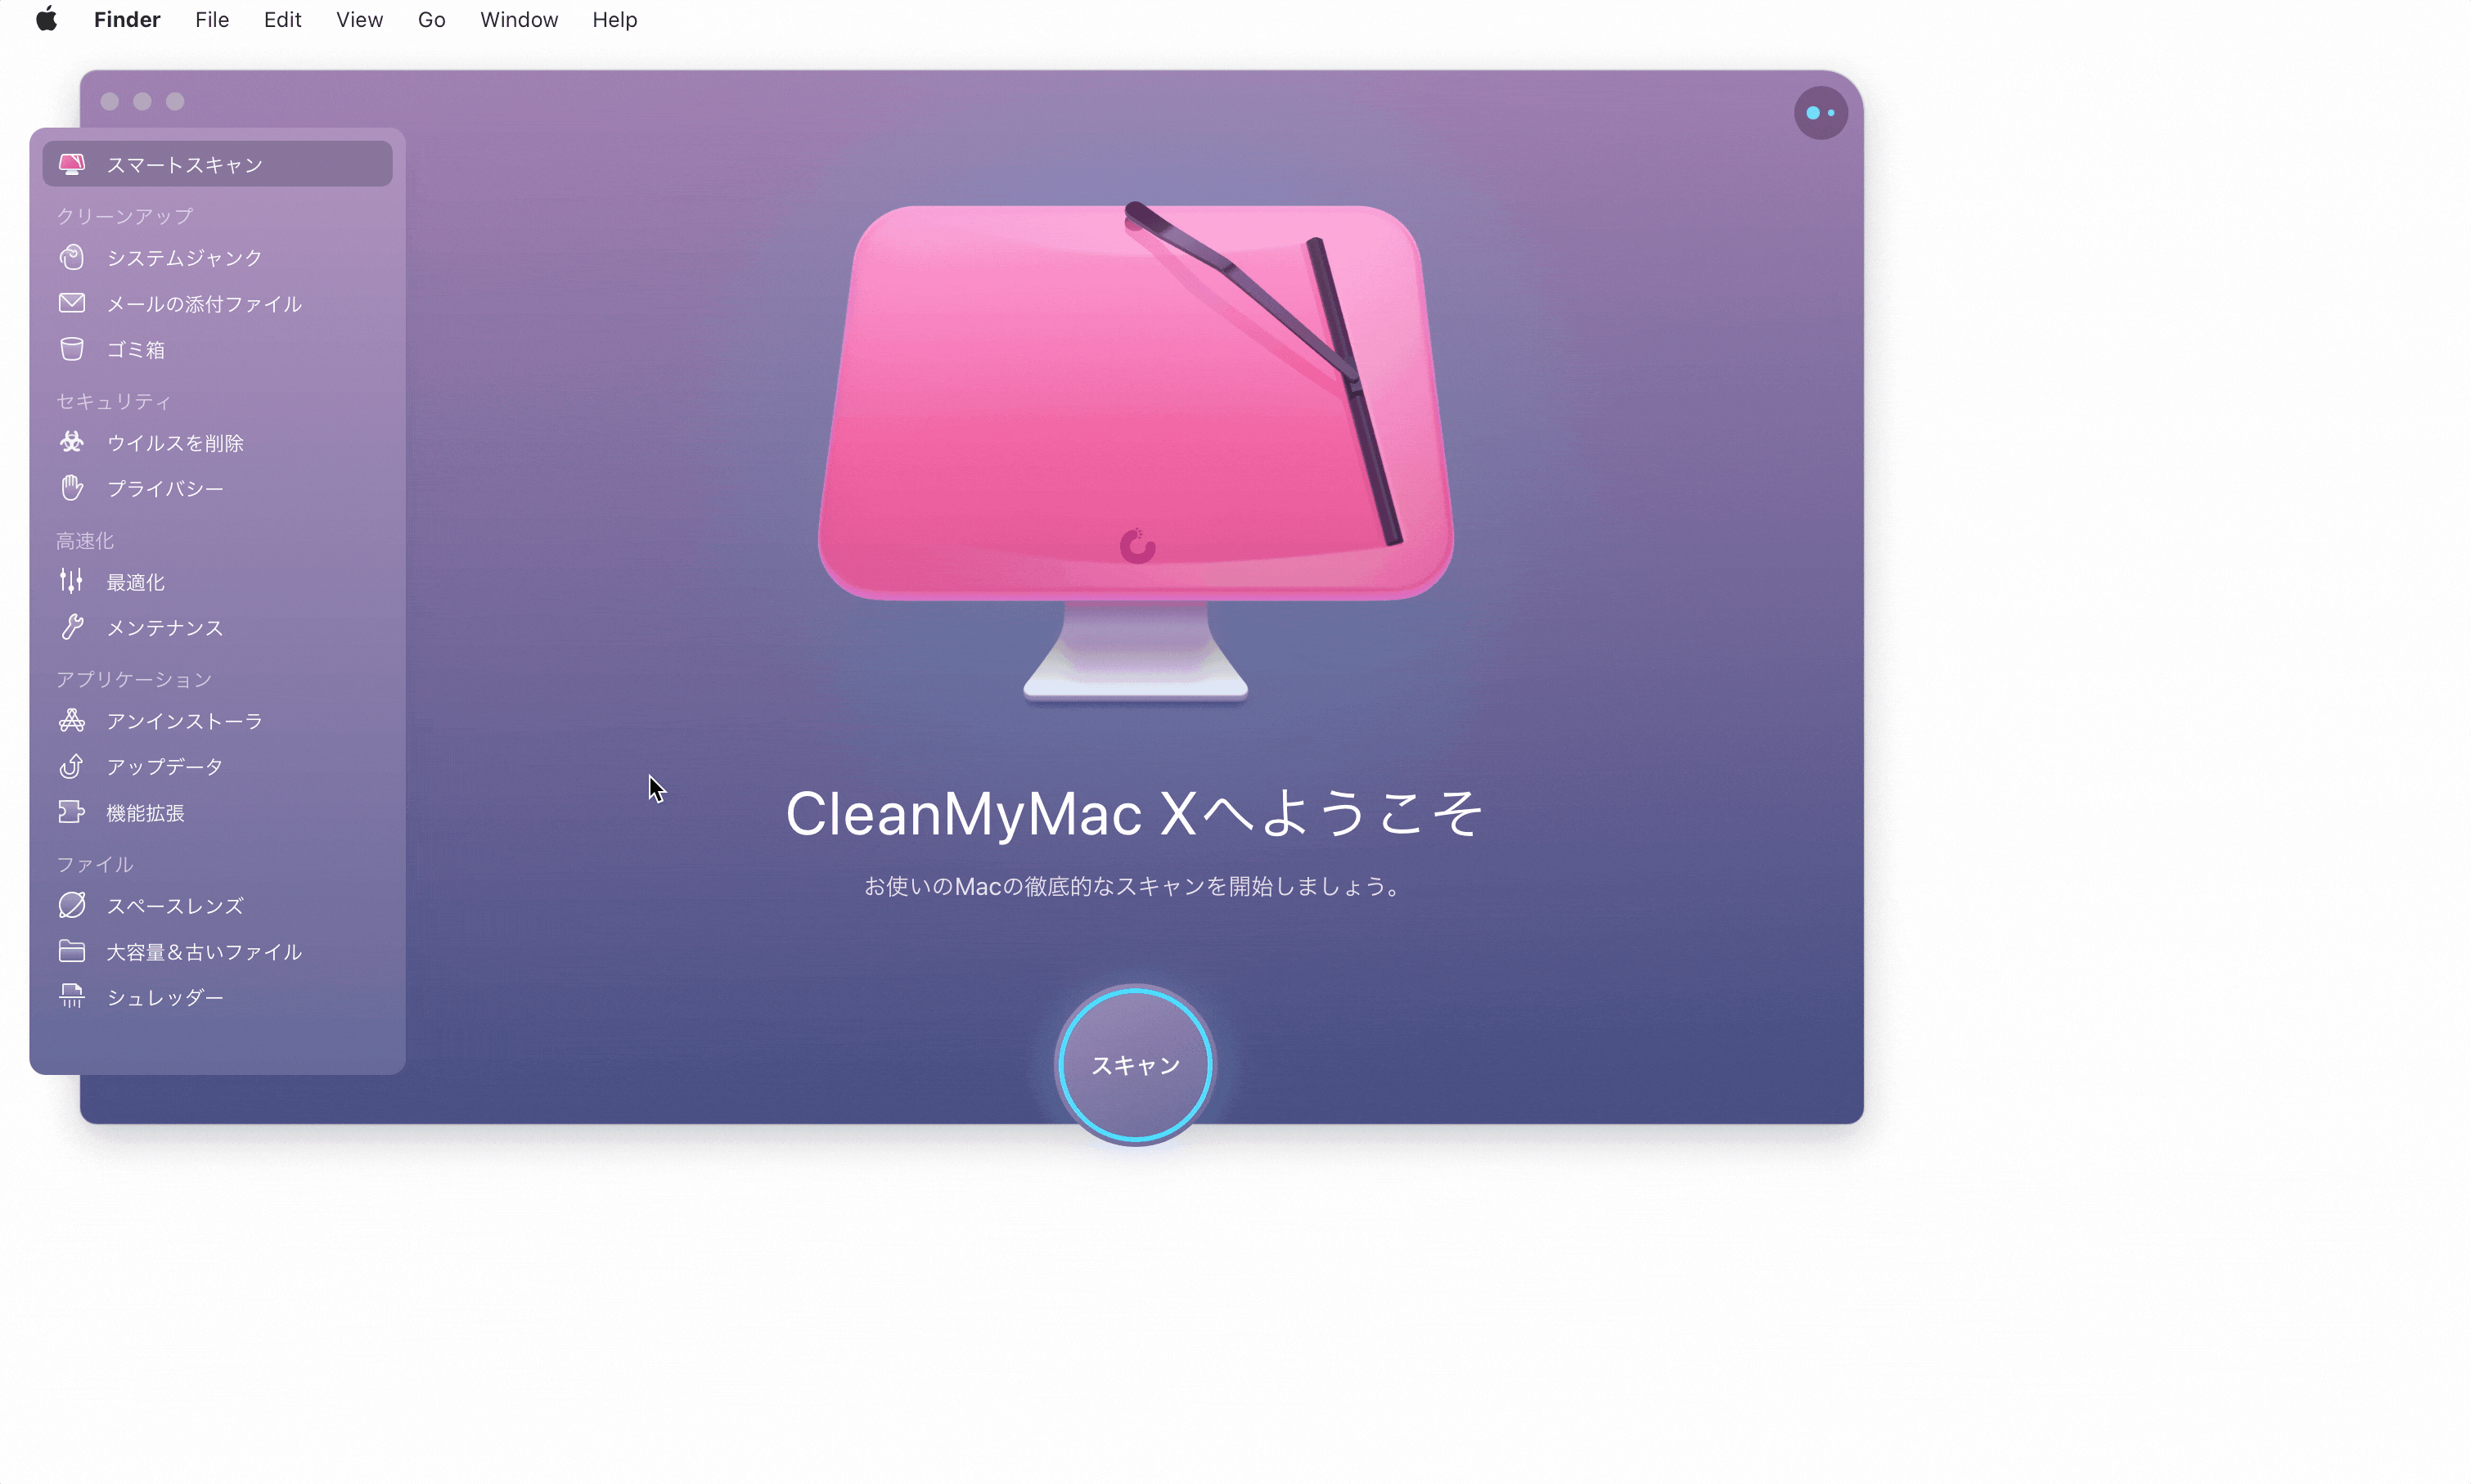 CleanMyMacXでスマートスキャンをカスタマイズする